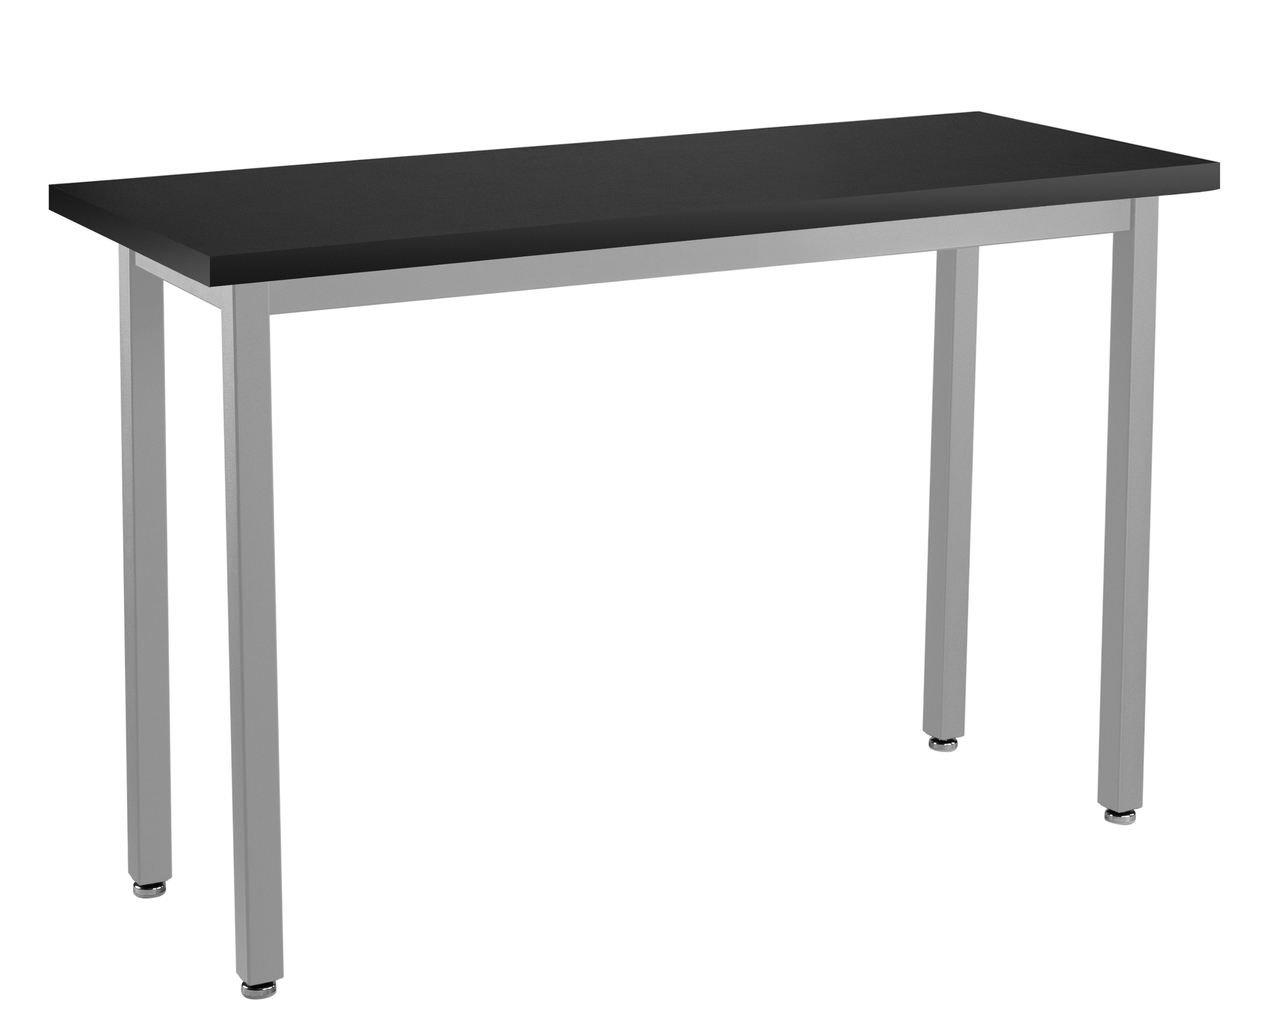 NPS Steel Science Lab Table -  18" x 42" -  Phenolic Top - Black Surface Color